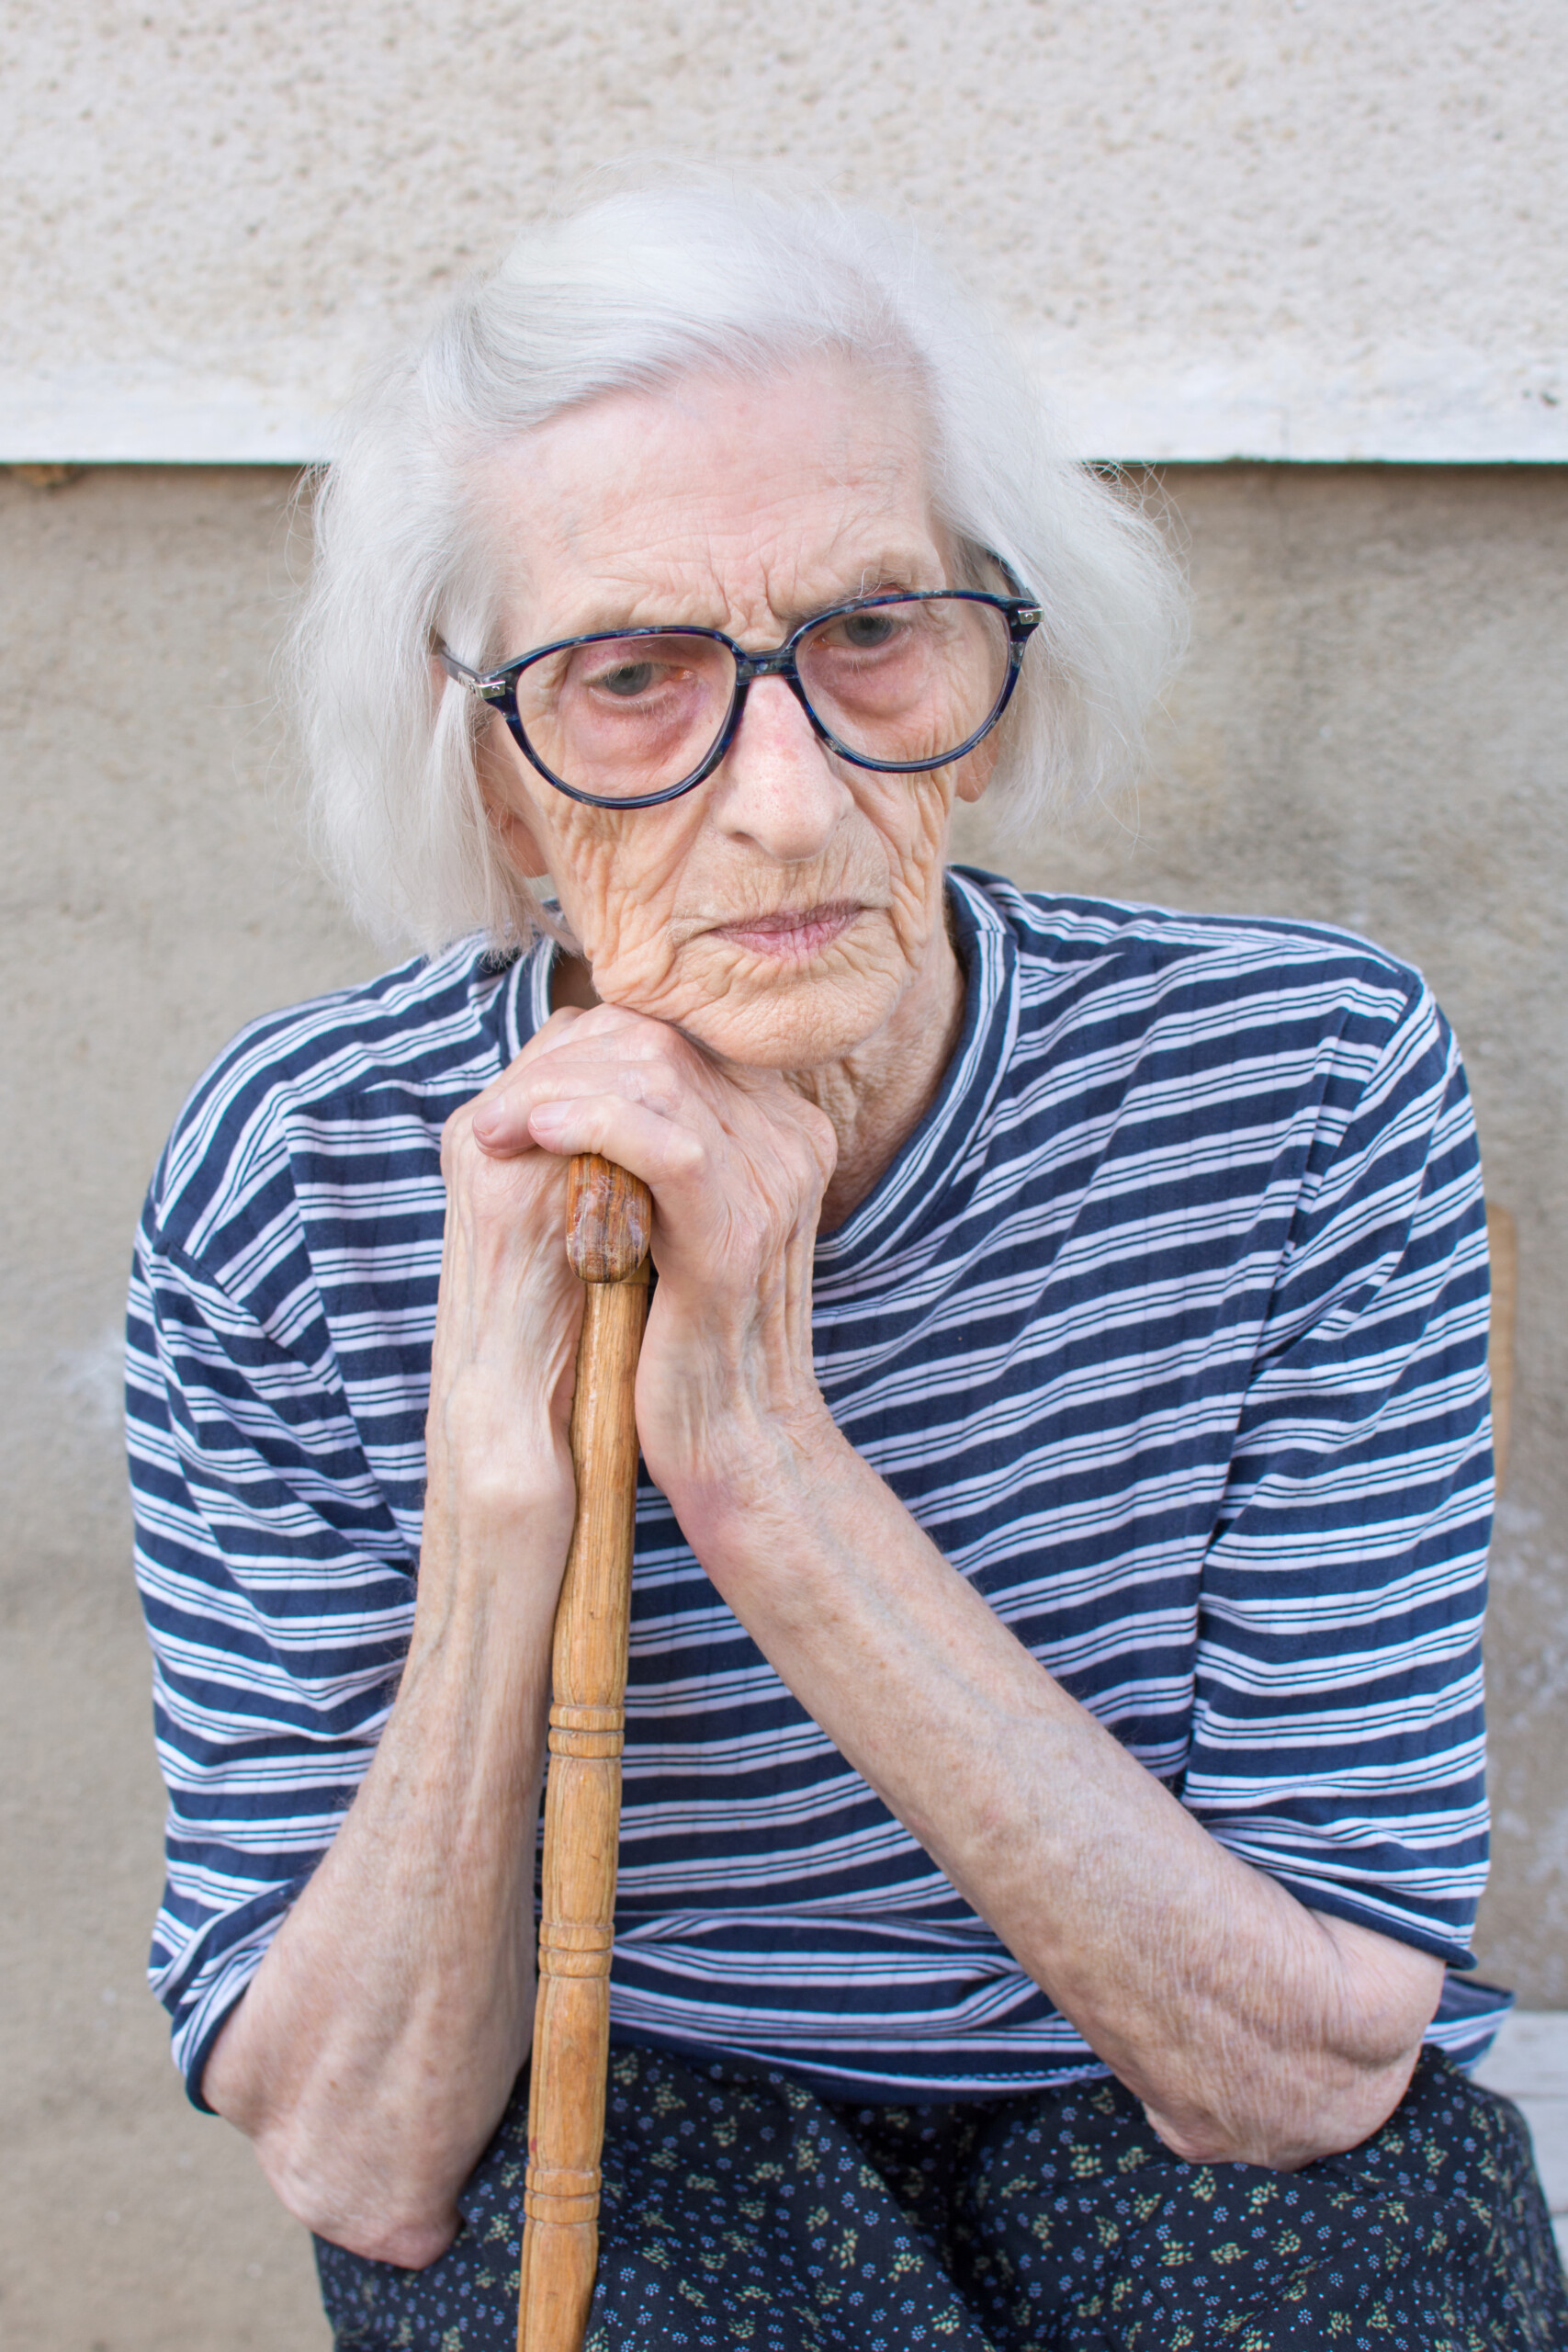 Middle Age Women Who Sit a Lot at Risk for Future Frailty